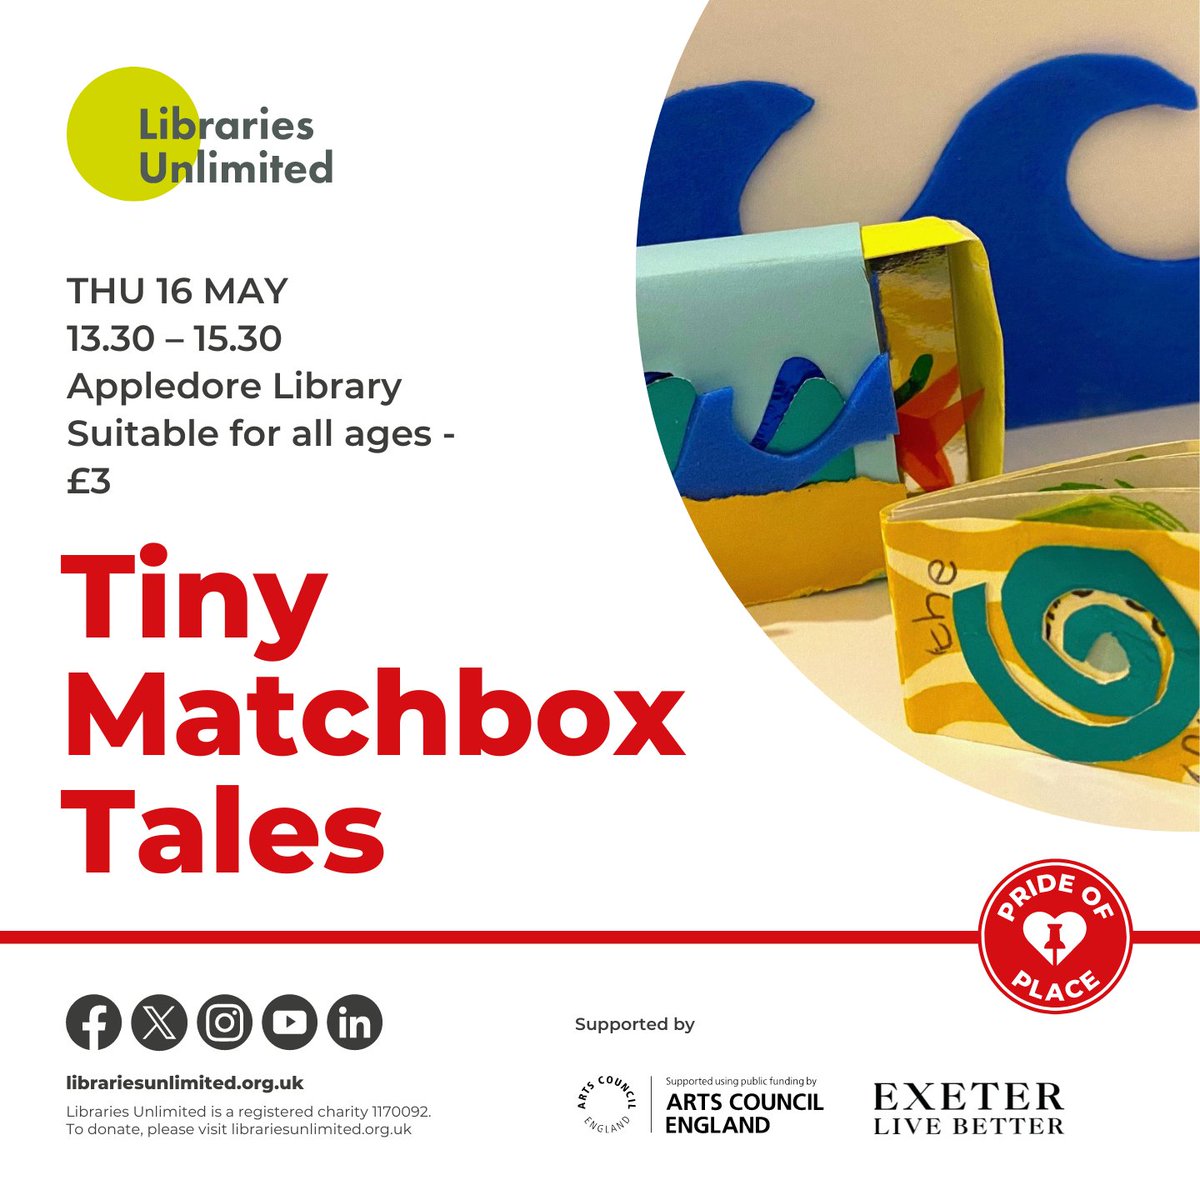 Come to Bideford. Appledore or Kingskerswell Library to make matchbox books and miniature decorated boxes using origami and concertina folds, along with papers, textiles, and drawing materials! Please contact the libraries directly for tickets. #LibrariesUnlimited #ACEFunded